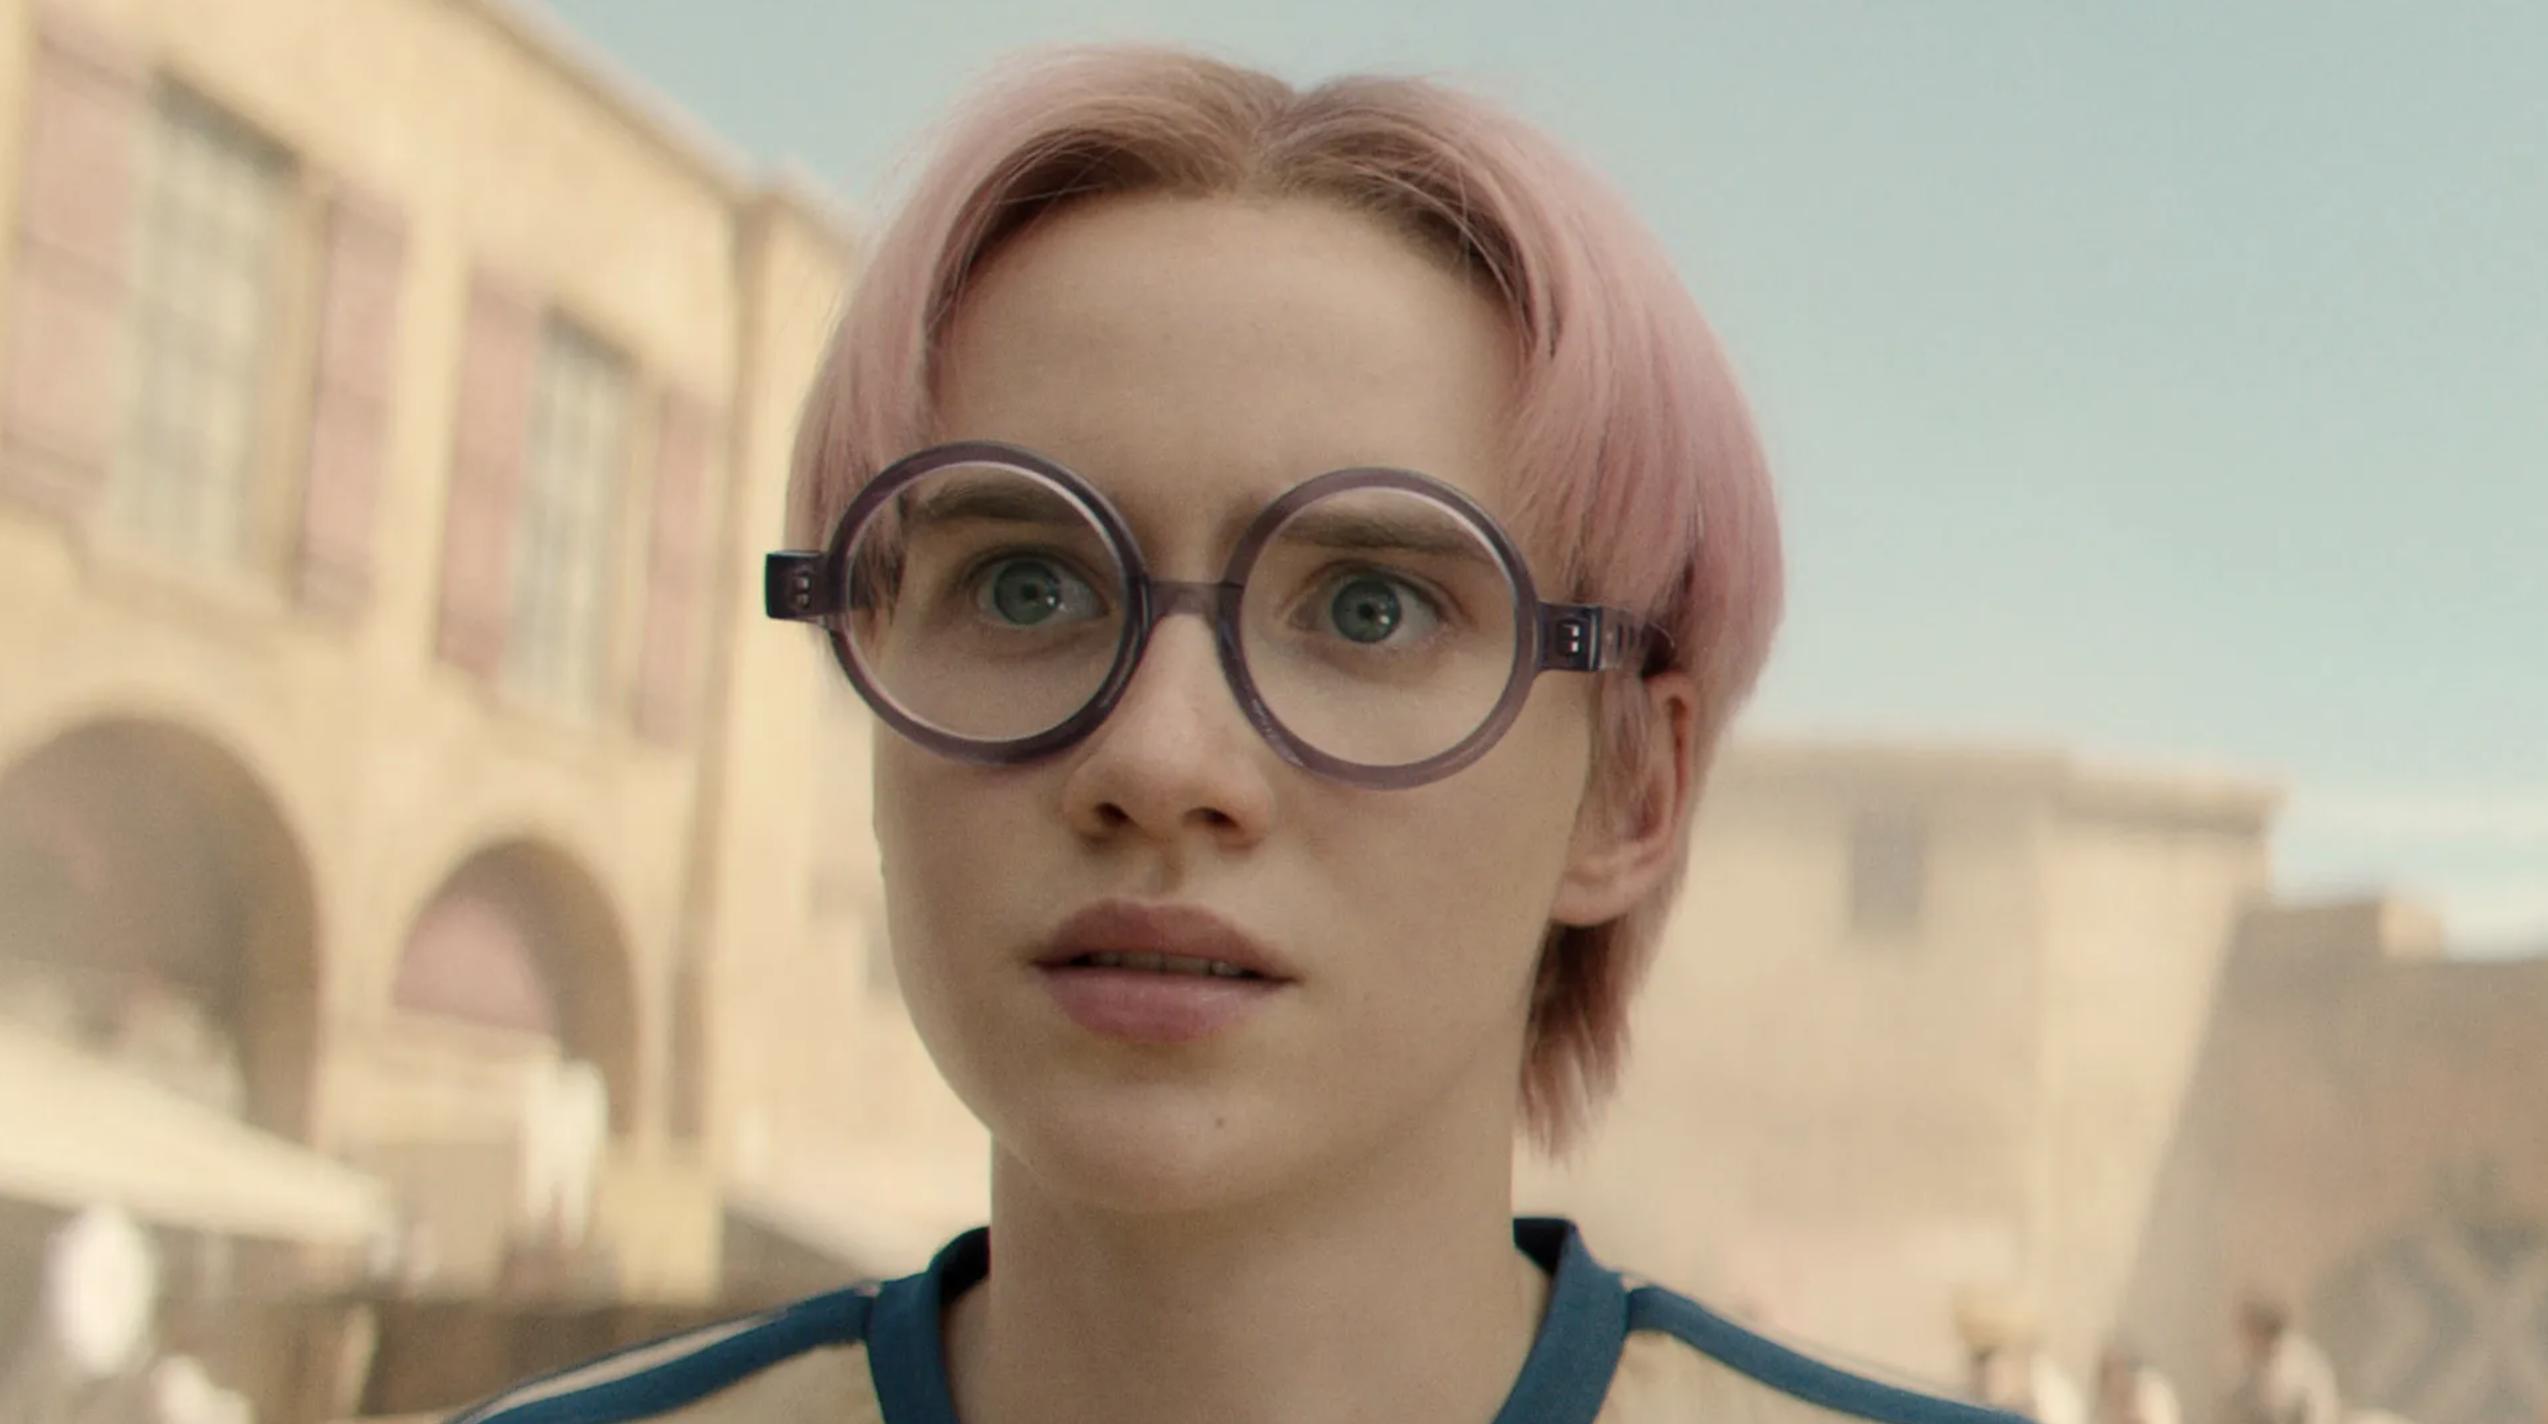 Morgan Davies, wearing circular glasses, stares incredulously off camera in a scene from Netflix